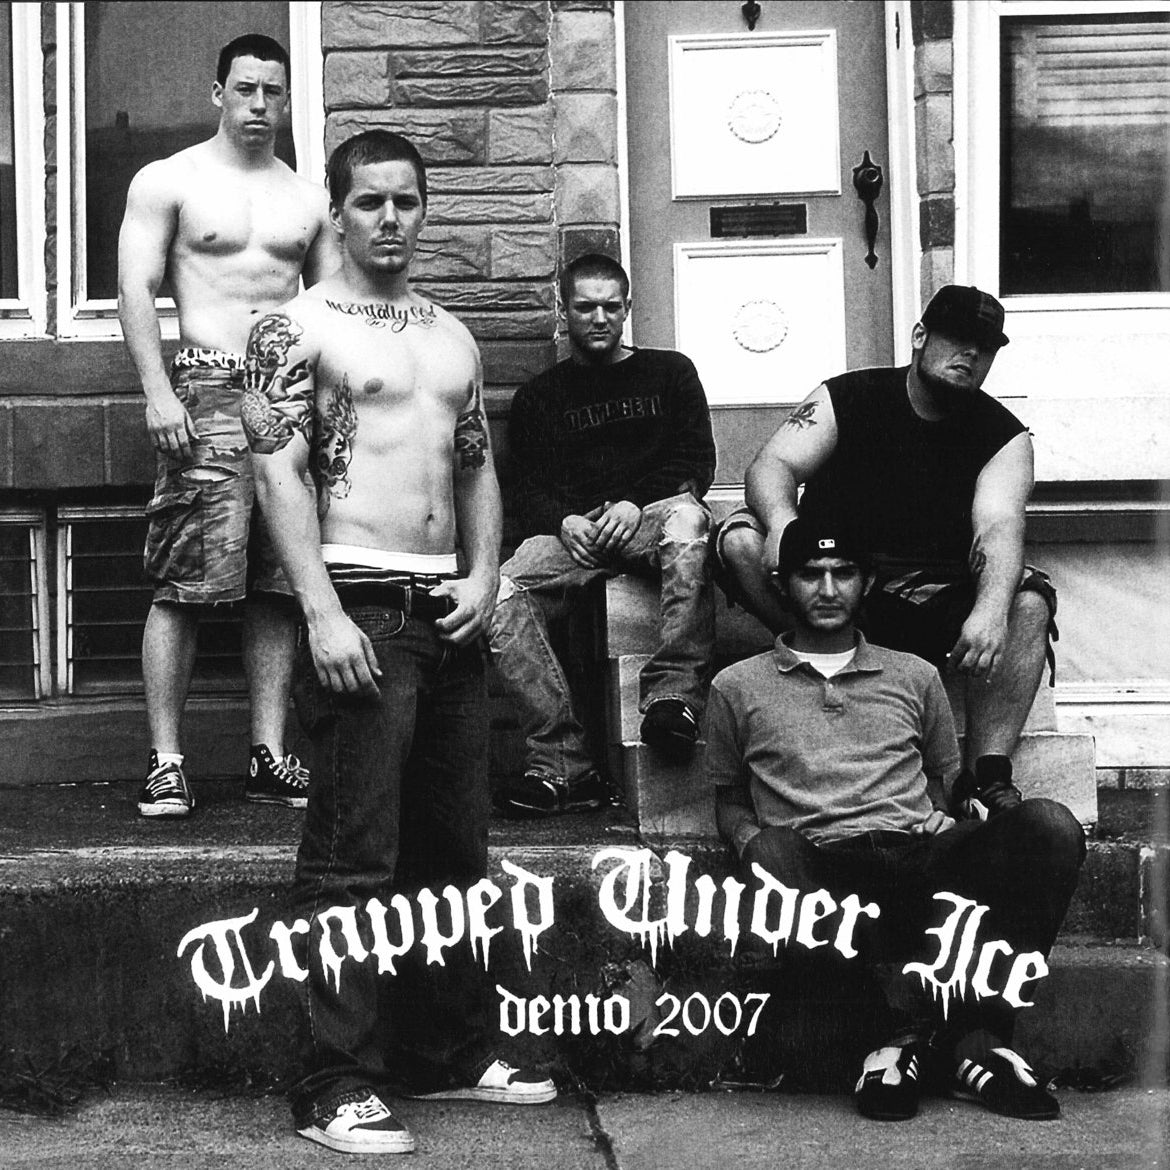 TRAPPED UNDER ICE "Demo 2007" 7"